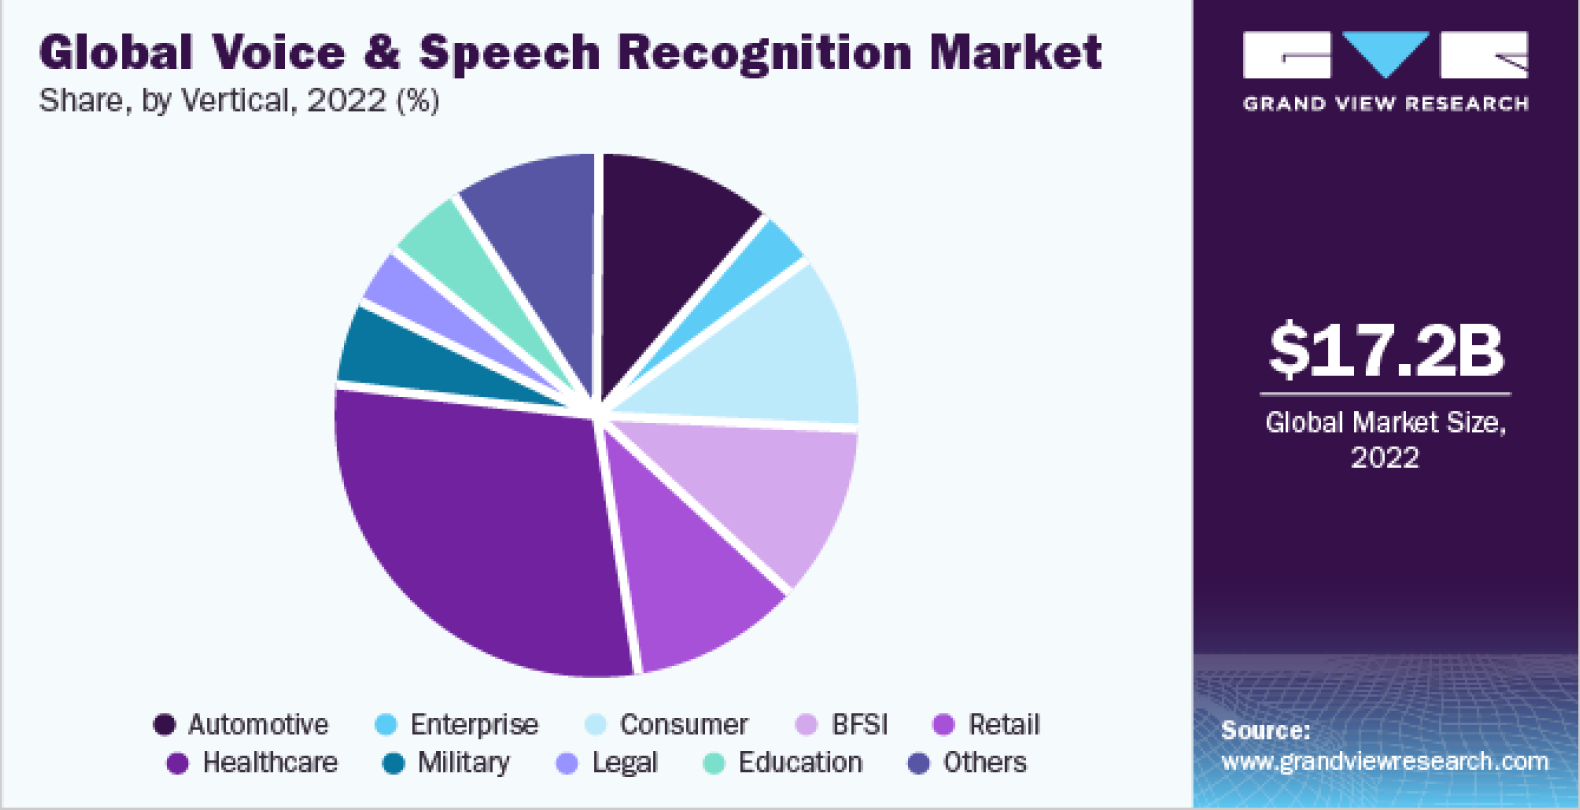 Dive into the global voice and speech recognition market. Learn about the latest trends and developments in this fast-growing industry.